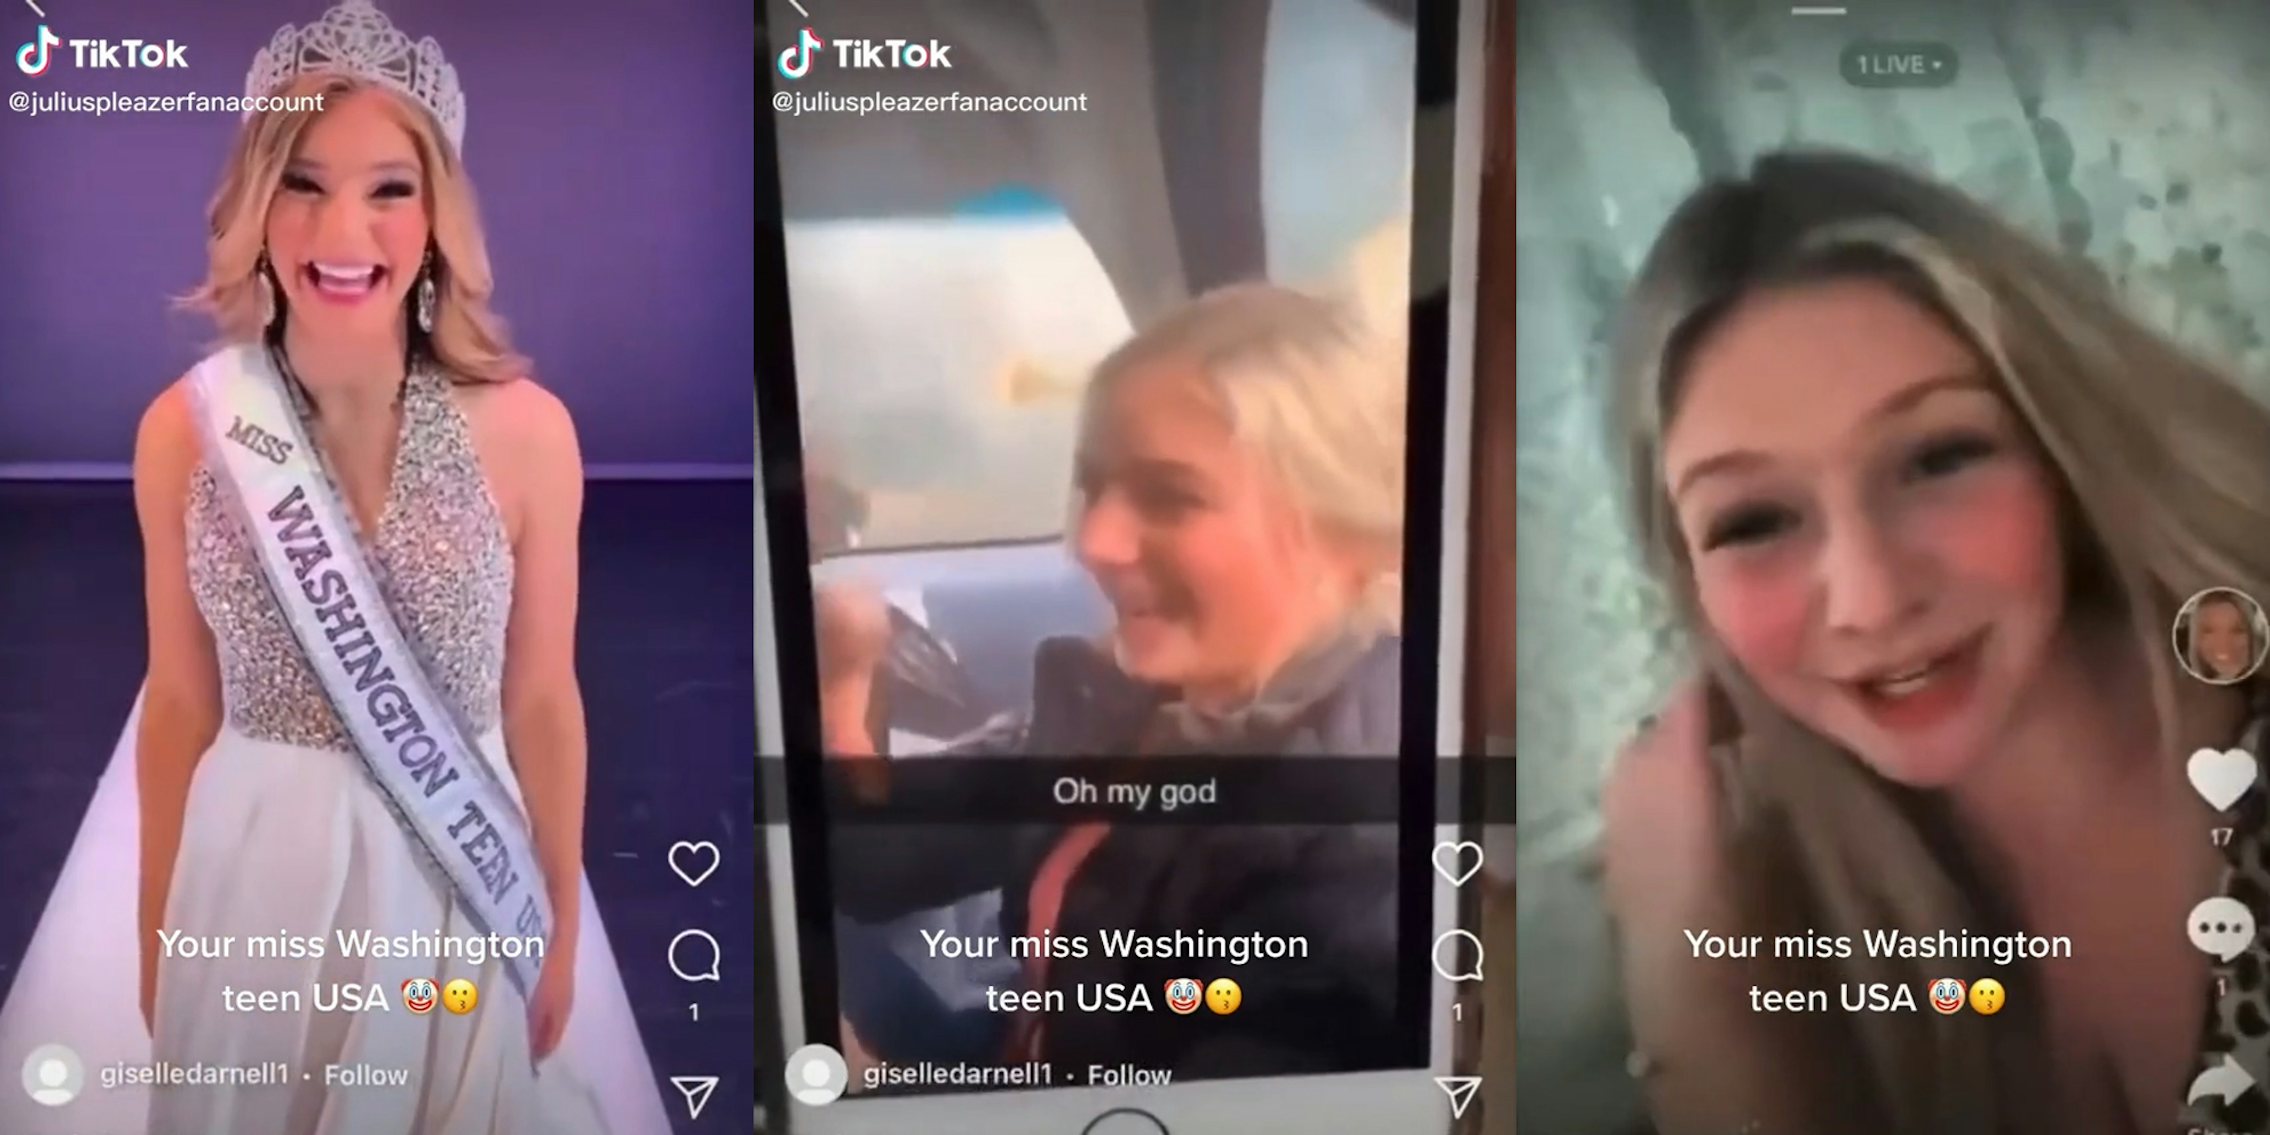 miss washington teen usa in dress and crown (l) same girl in back seat of car (c) same girl laughing (r) all with caption 'Your miss Washington teen USA'